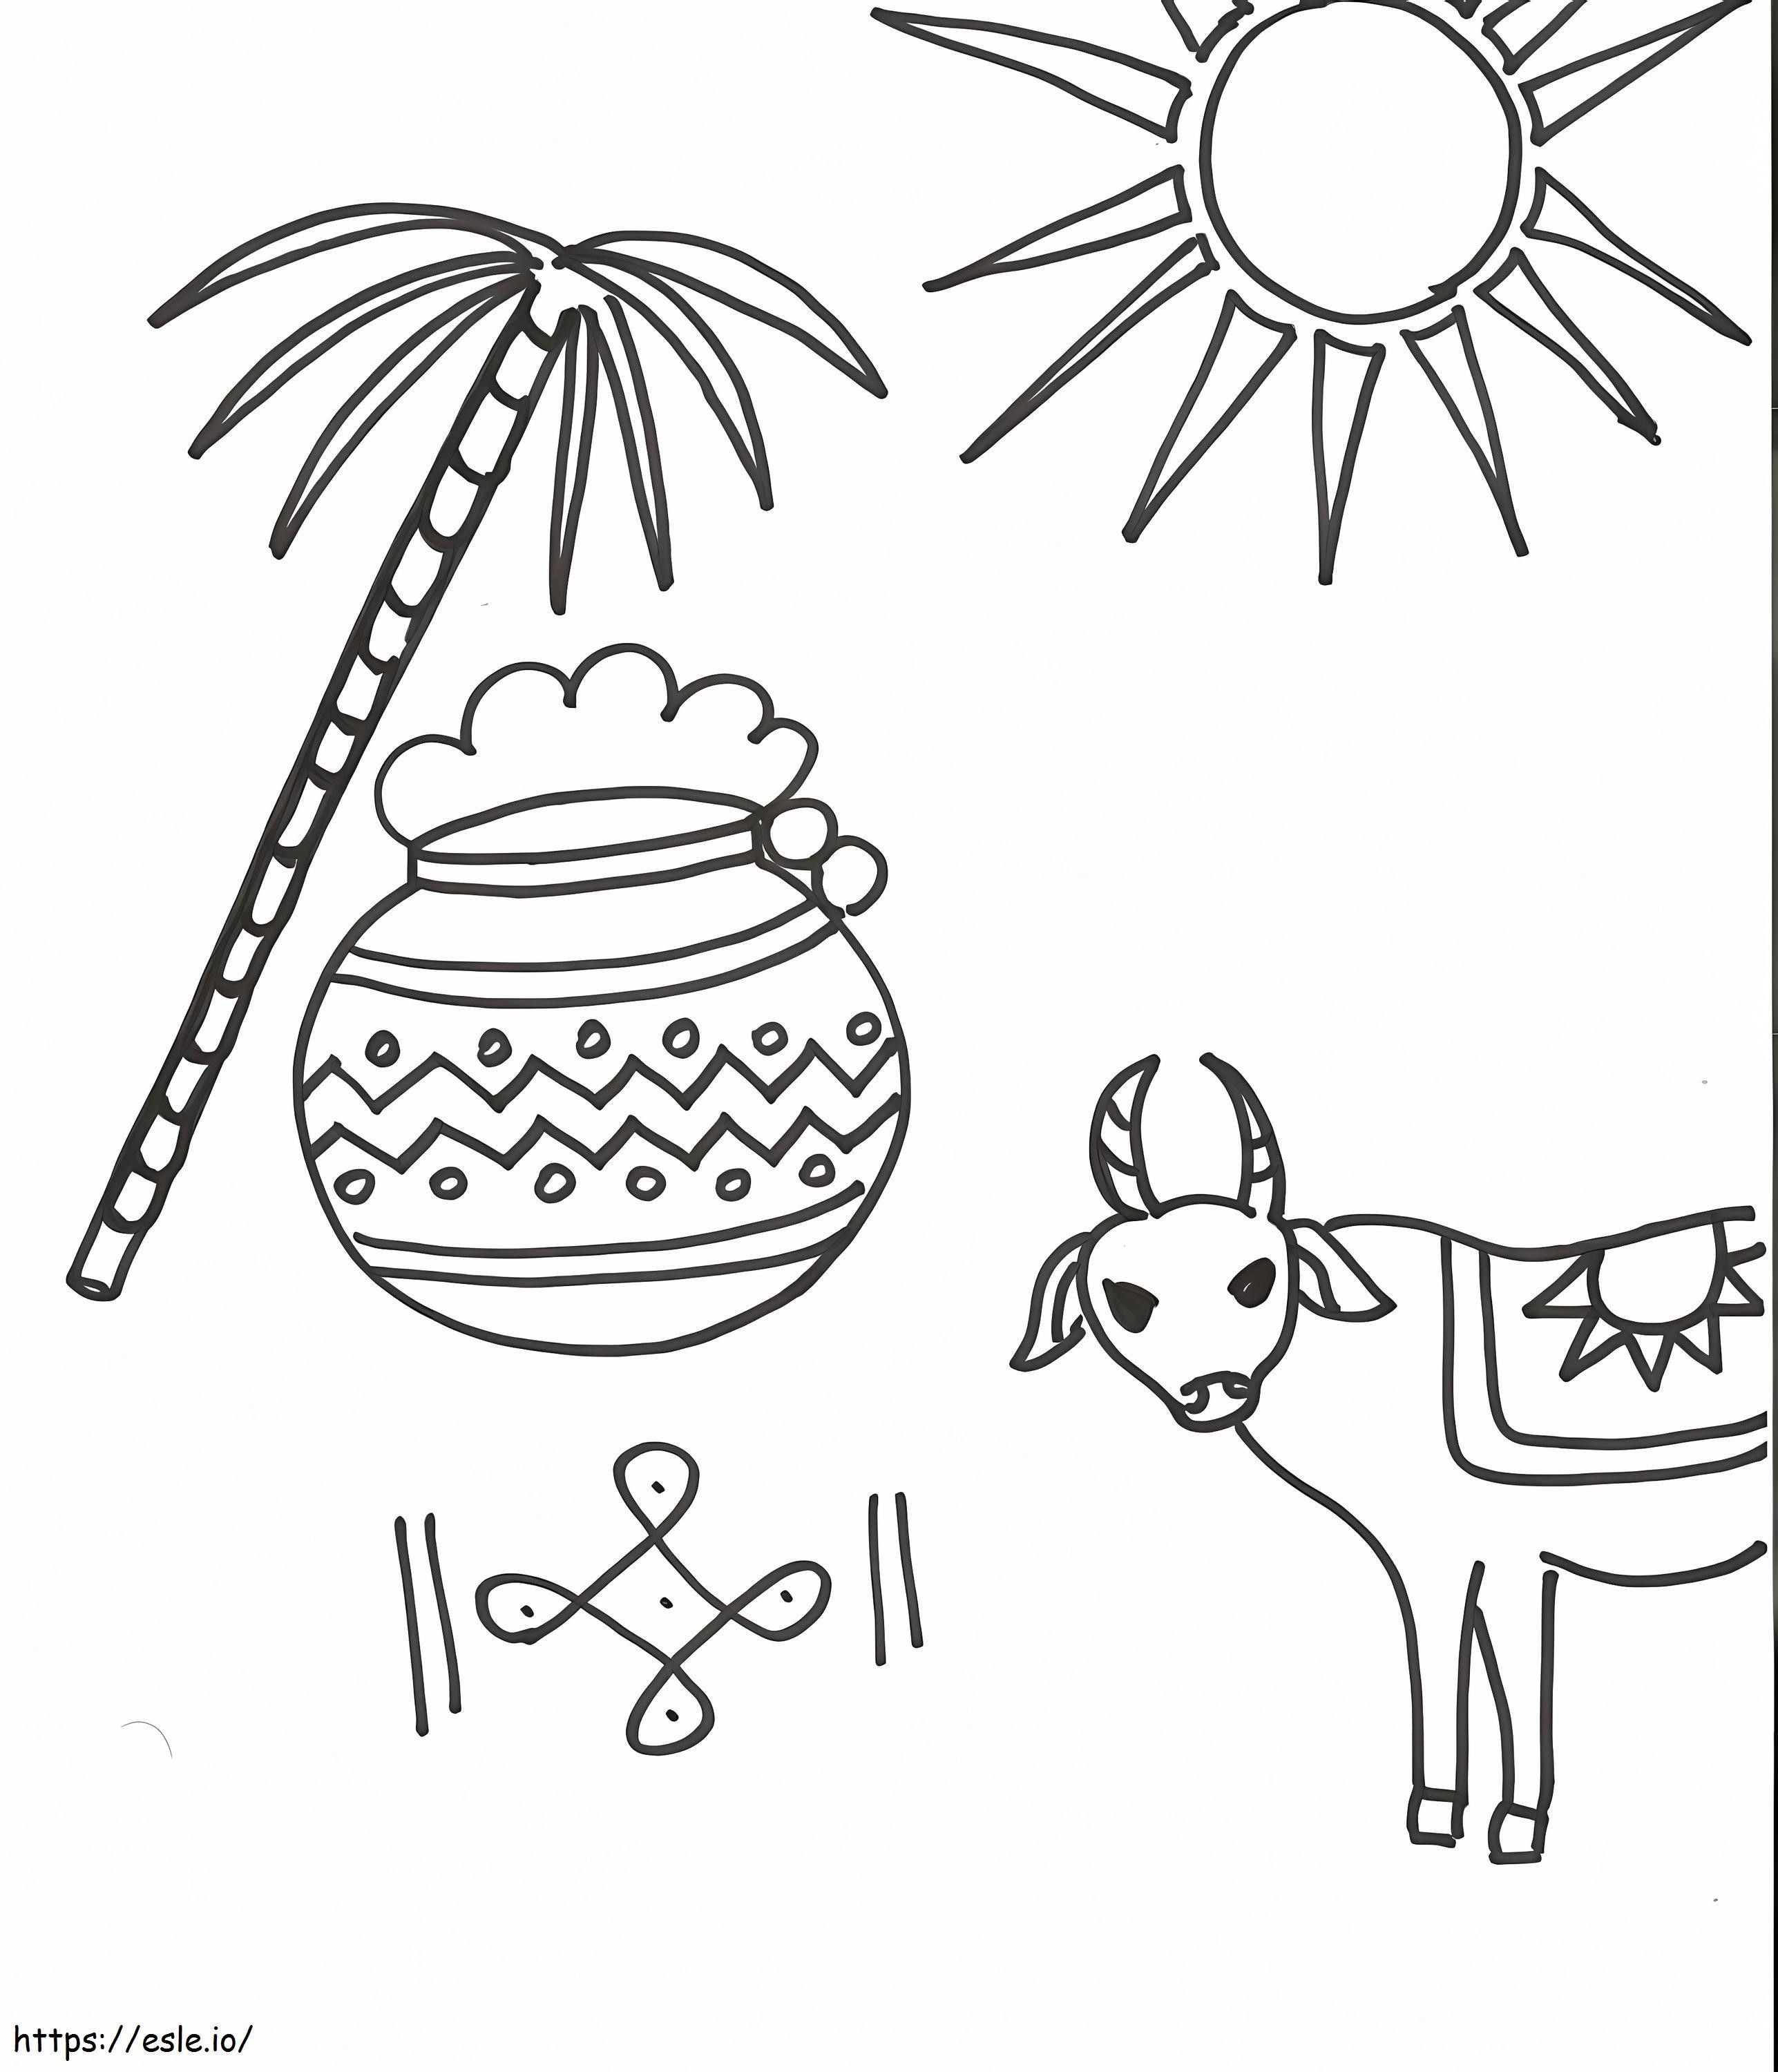 Pongal coloring page